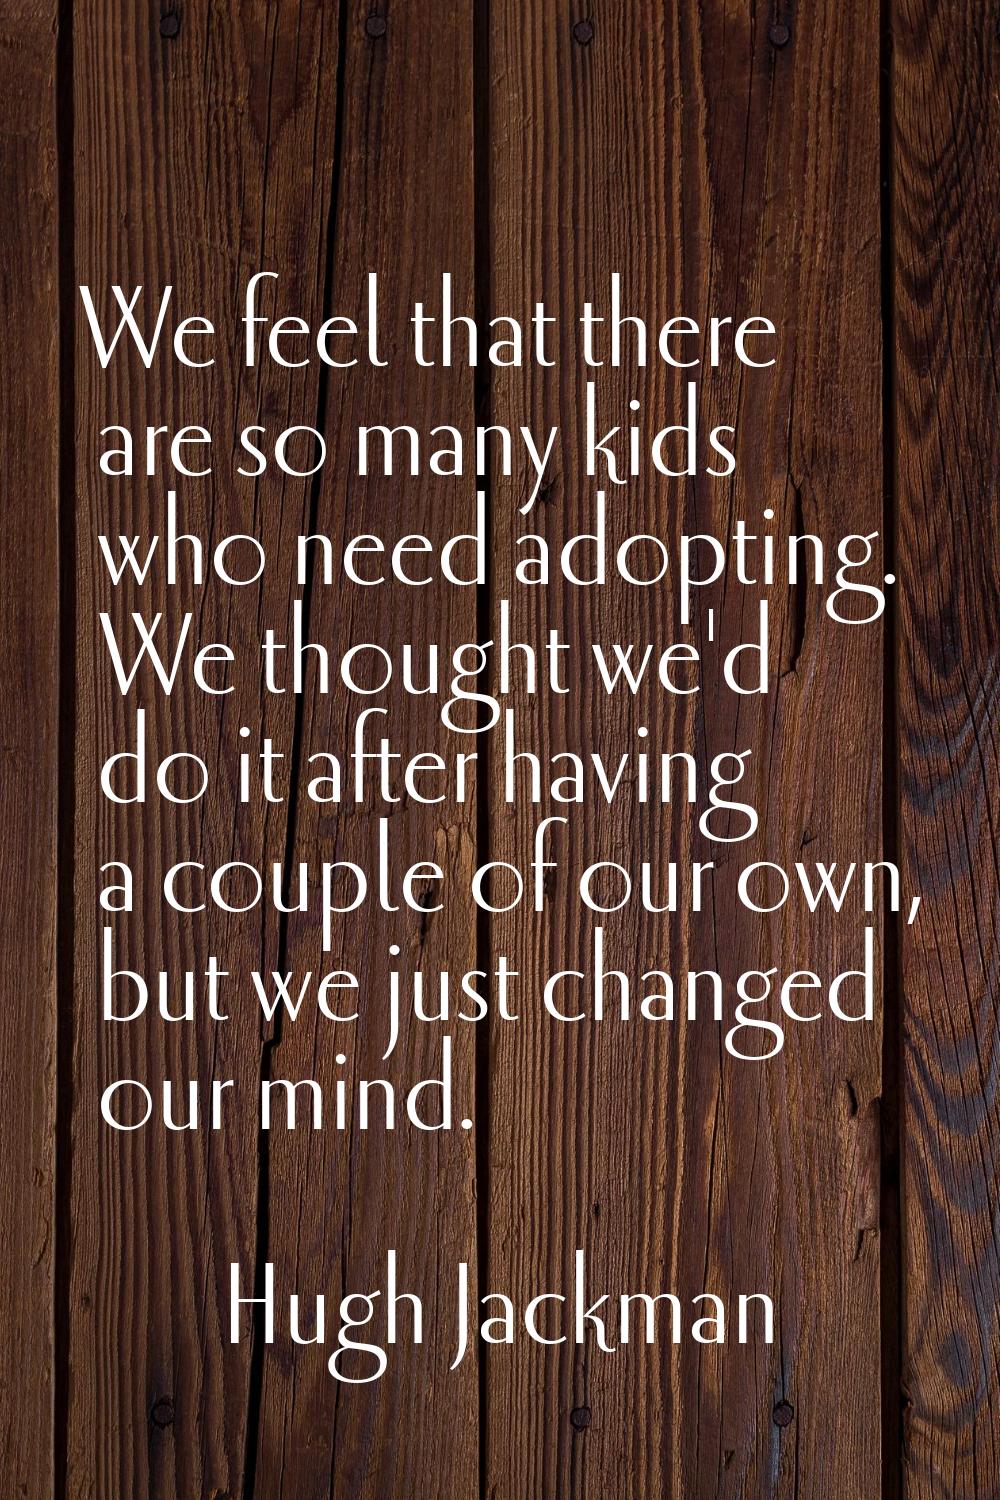 We feel that there are so many kids who need adopting. We thought we'd do it after having a couple 